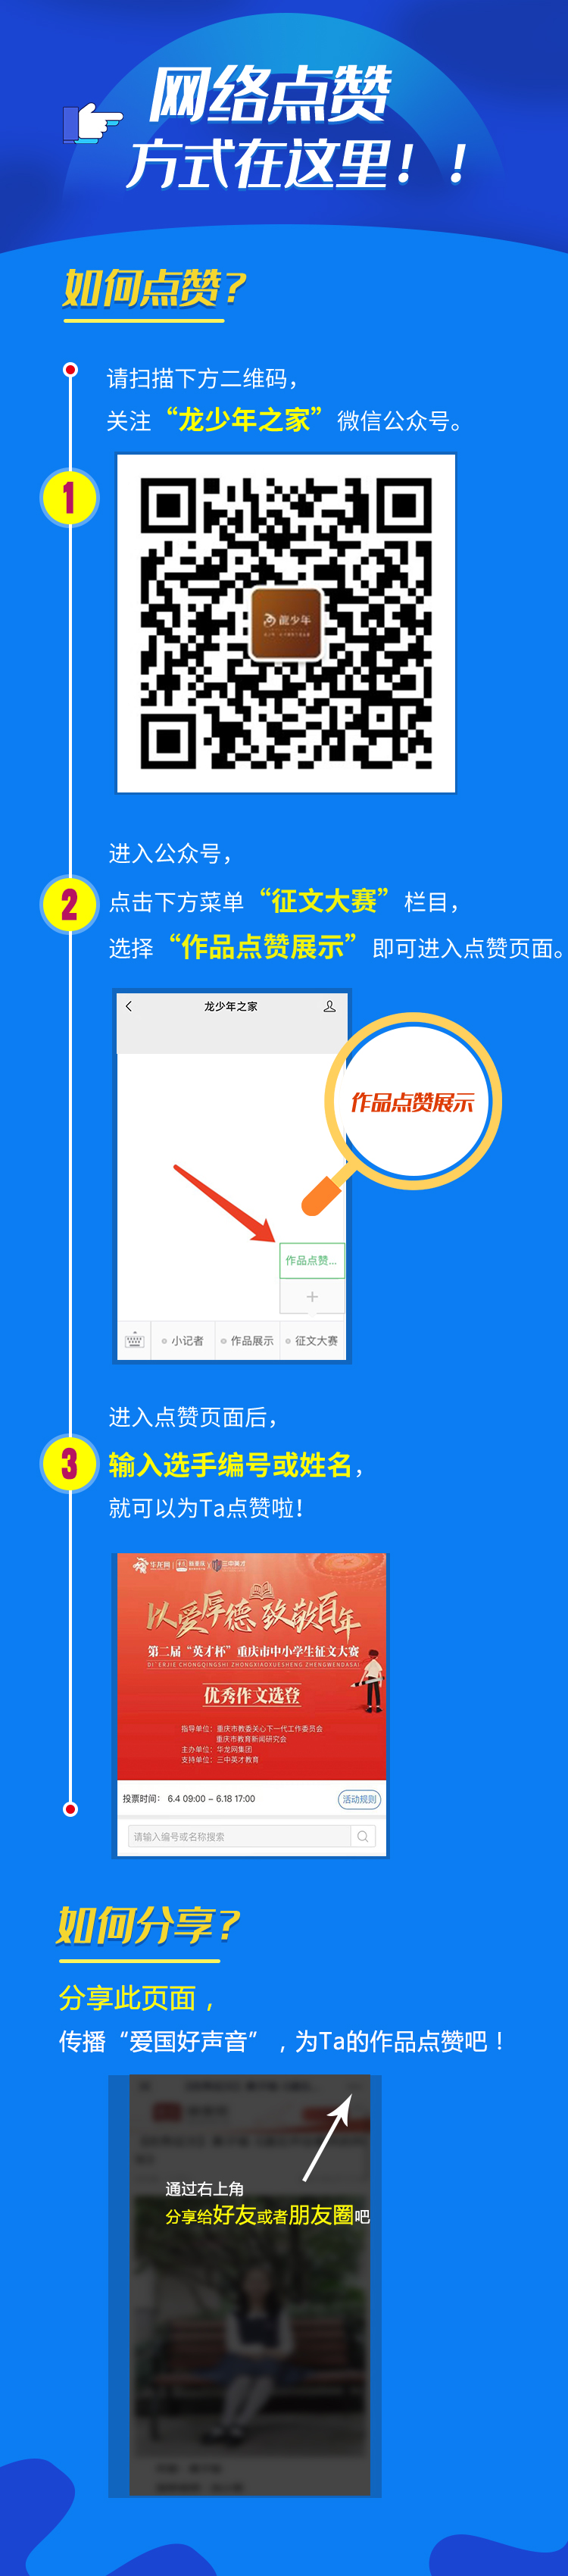 ../Library/Containers/com.tencent.xinWeChat/Data/Library/Application%20Support/com.tencent.xinWeChat/2.0b4.0.9/562089f49e43f6add092824e5409fd7a/Message/MessageTemp/9e20f478899dc29eb19741386f9343c8/Image/27001623724423_.pic_hd.jpg